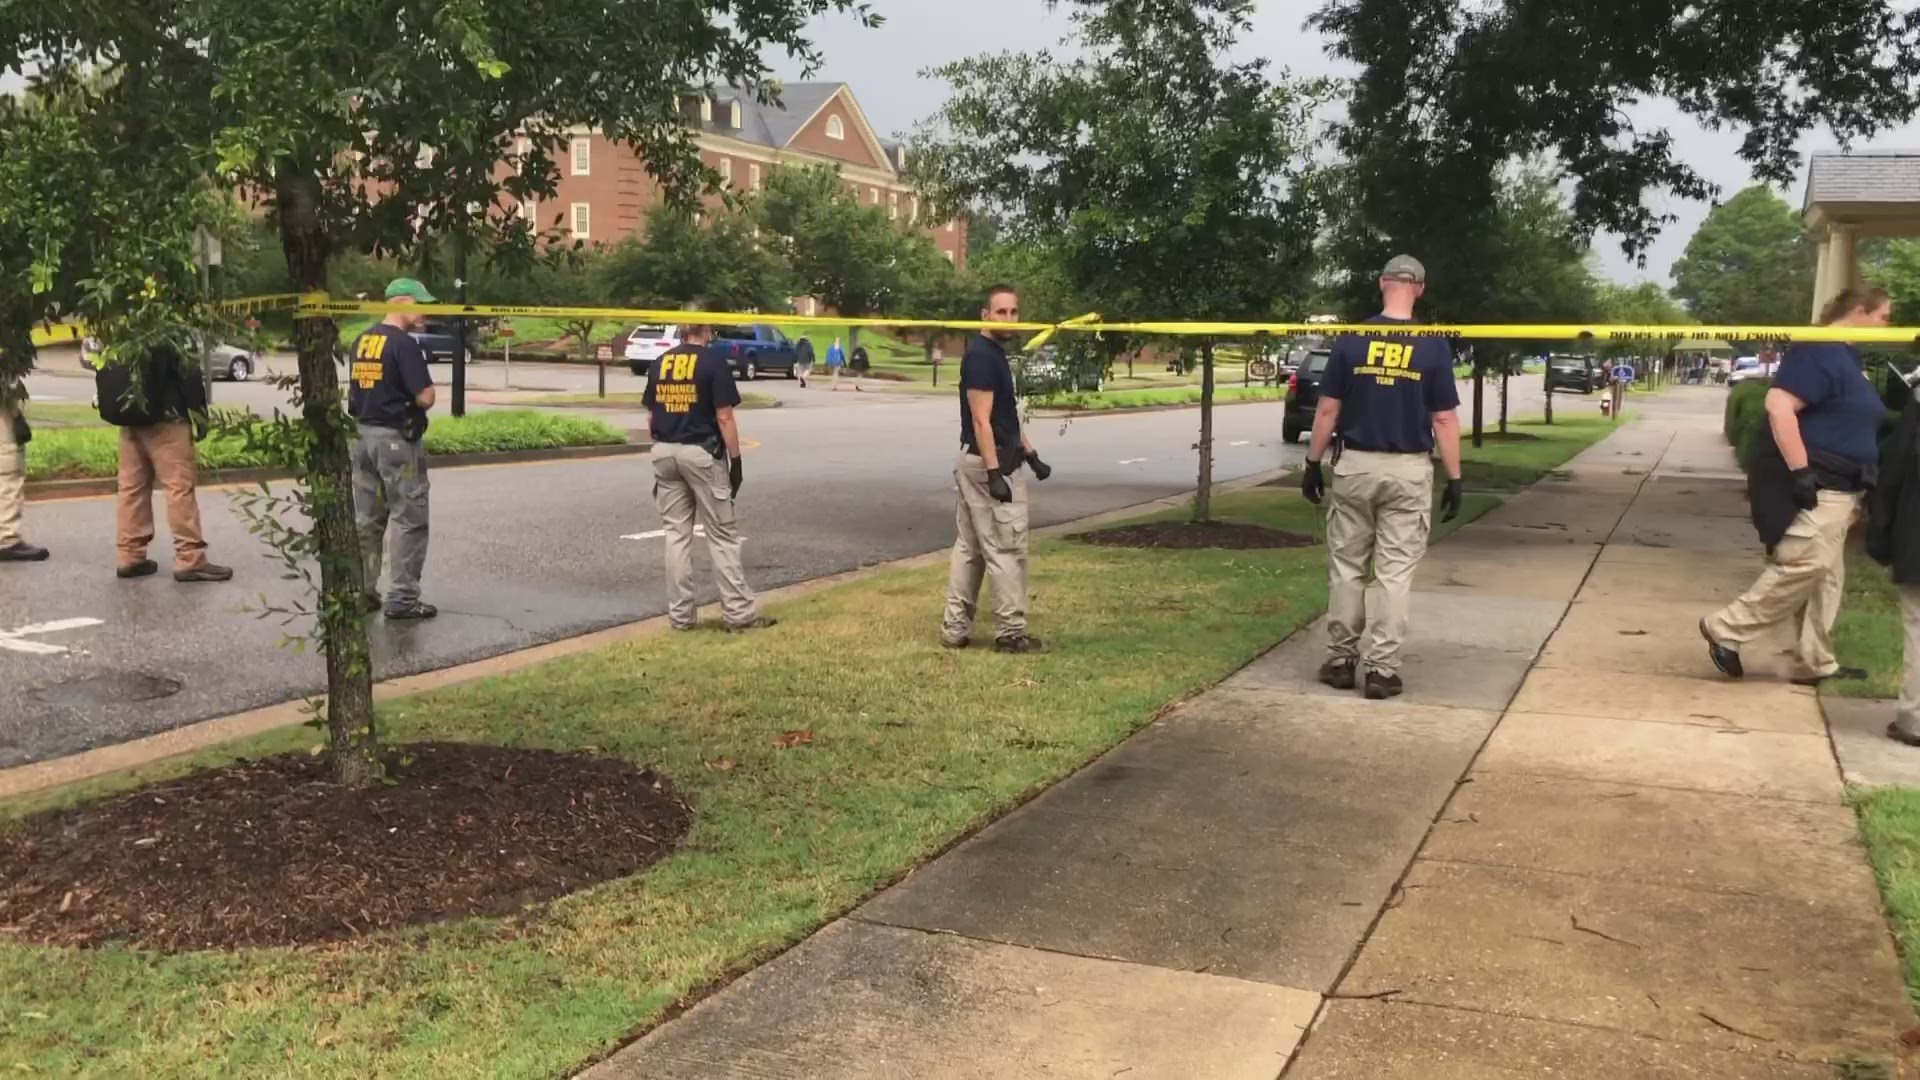 Members of the FBI were at the Virginia Beach Municipal Center on June 1, 2019, a day after a mass shooting there that left 12 people dead and others hurt.